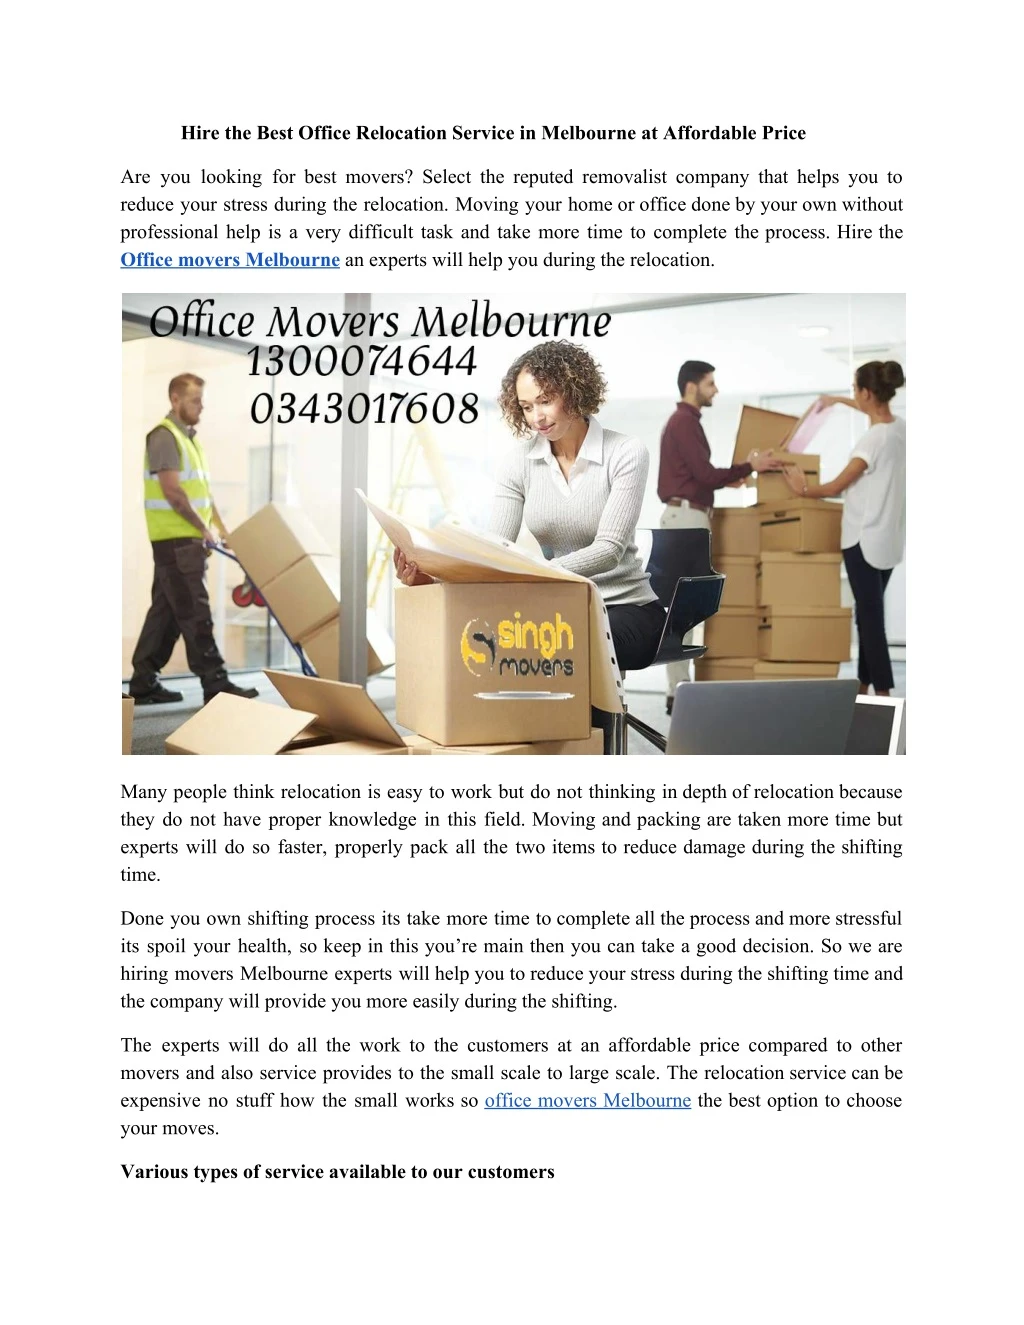 hire the best office relocation service